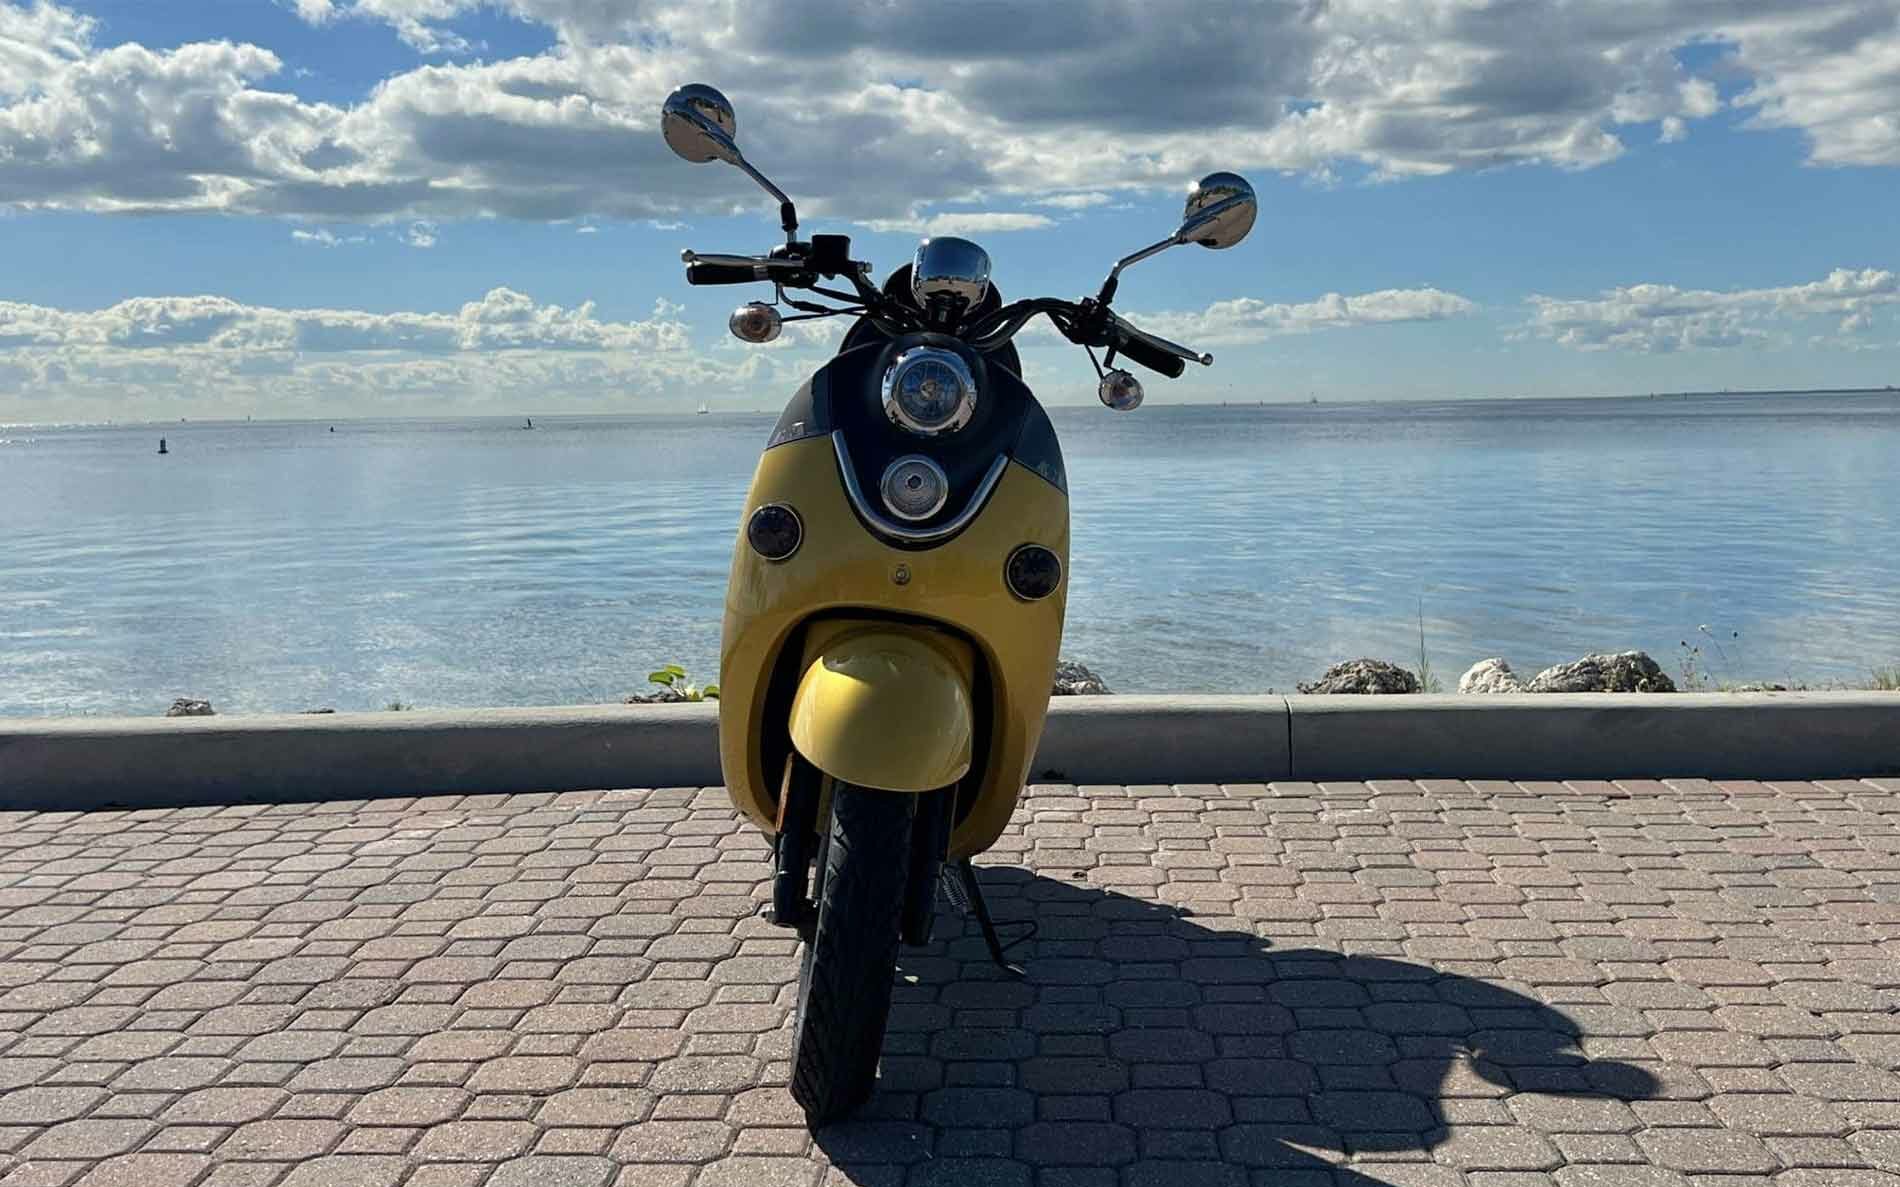 italica-mini-50cc-yellow-scooter-rental-front